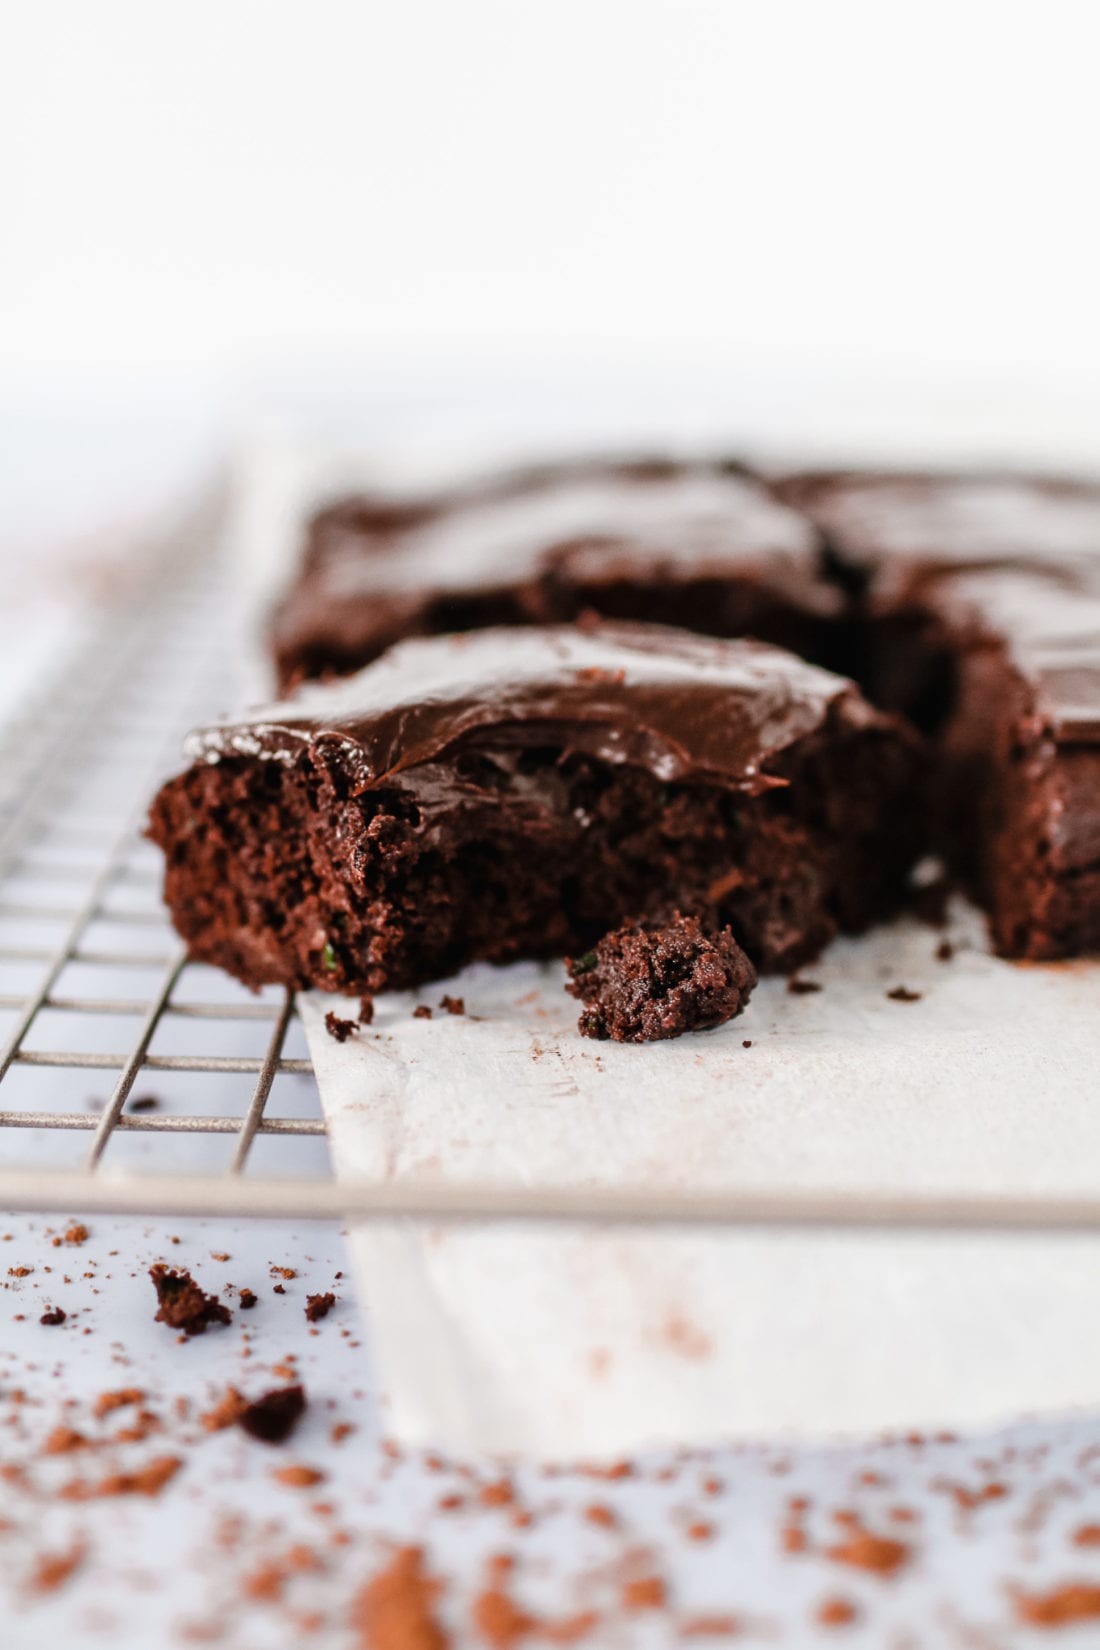 This gluten-free triple chocolate zucchini brownie slathered in chocolate avocado frosting is the ultimate decadent dessert but with a healthy twist. 